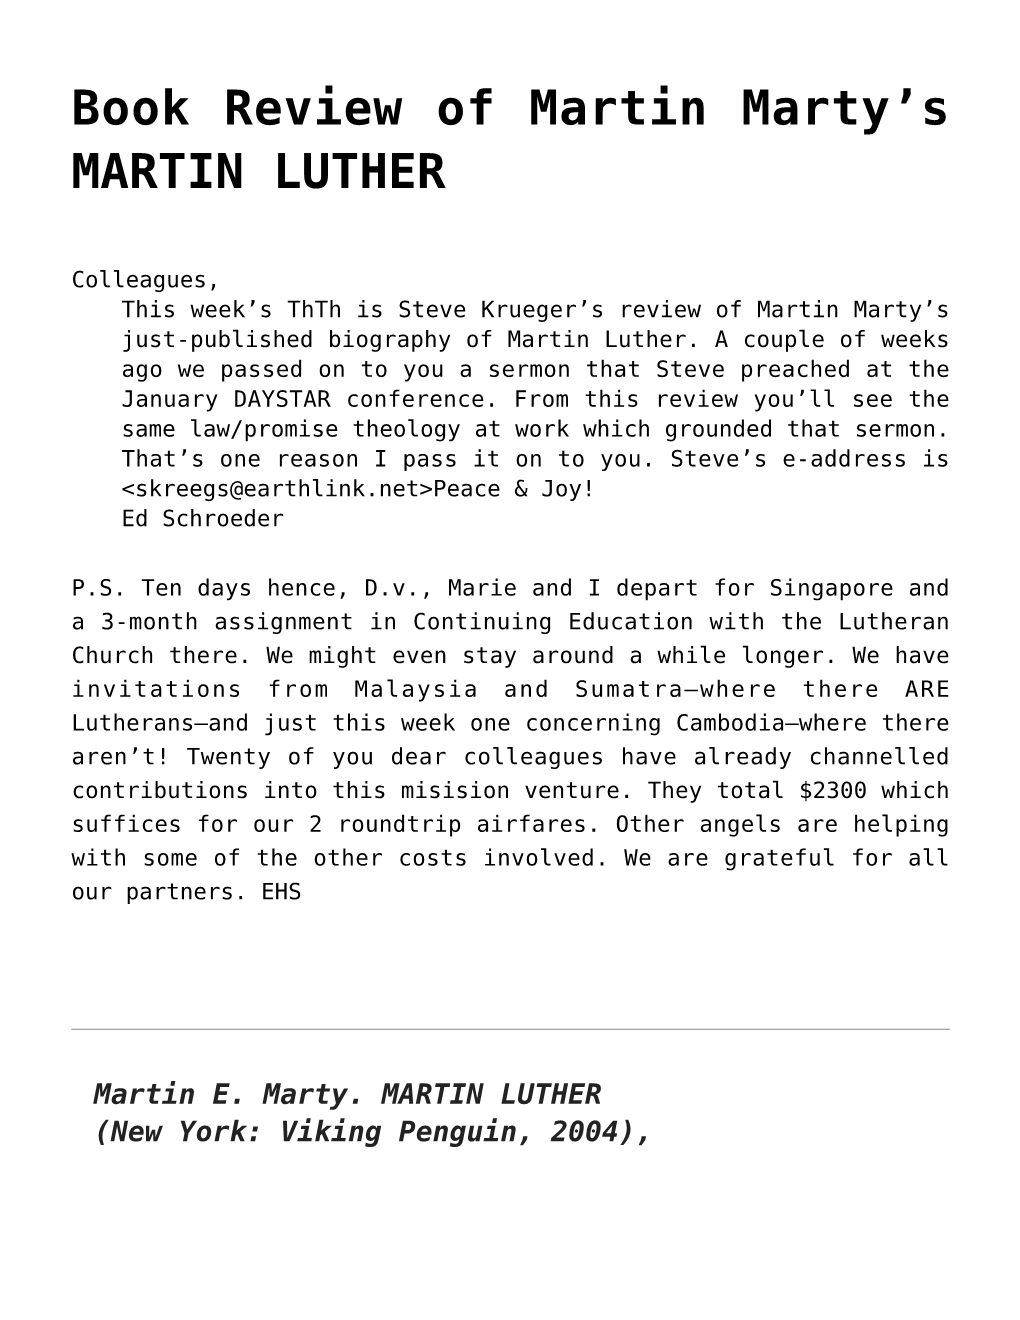 S MARTIN LUTHER